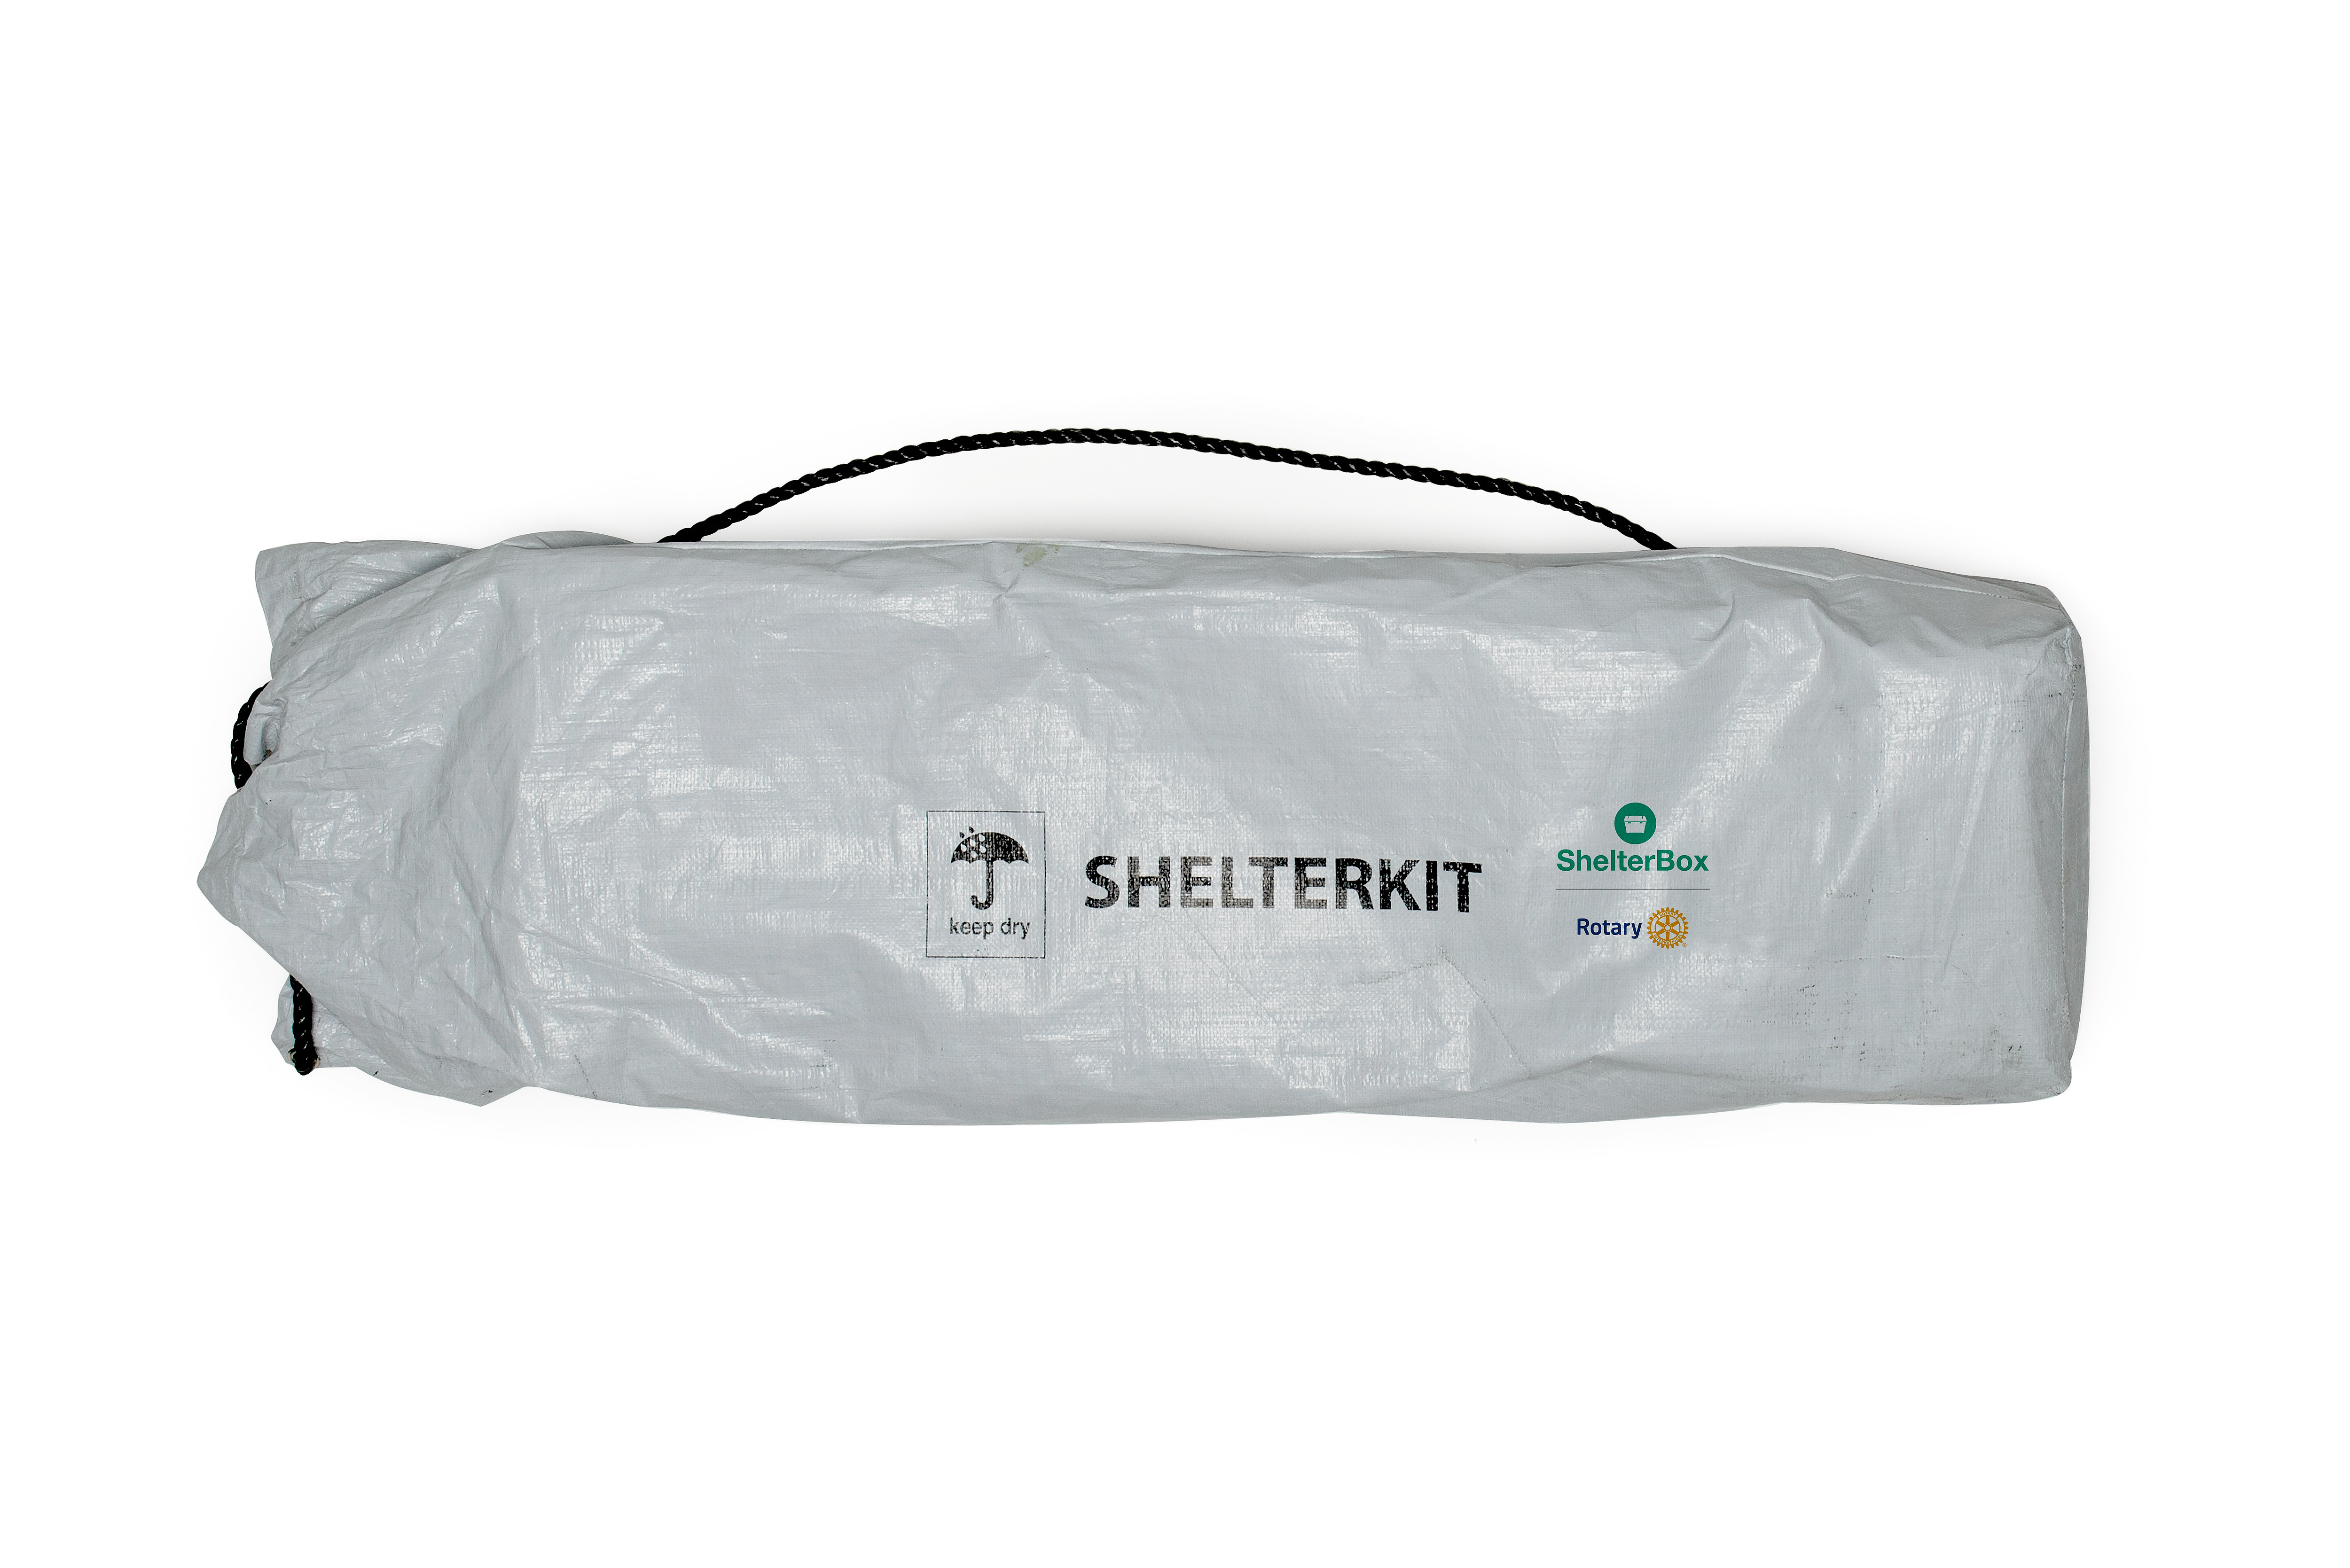 A ShelterKit containing disaster relief items, including tarpaulins, rope and tools, to help families rebuild after disaster